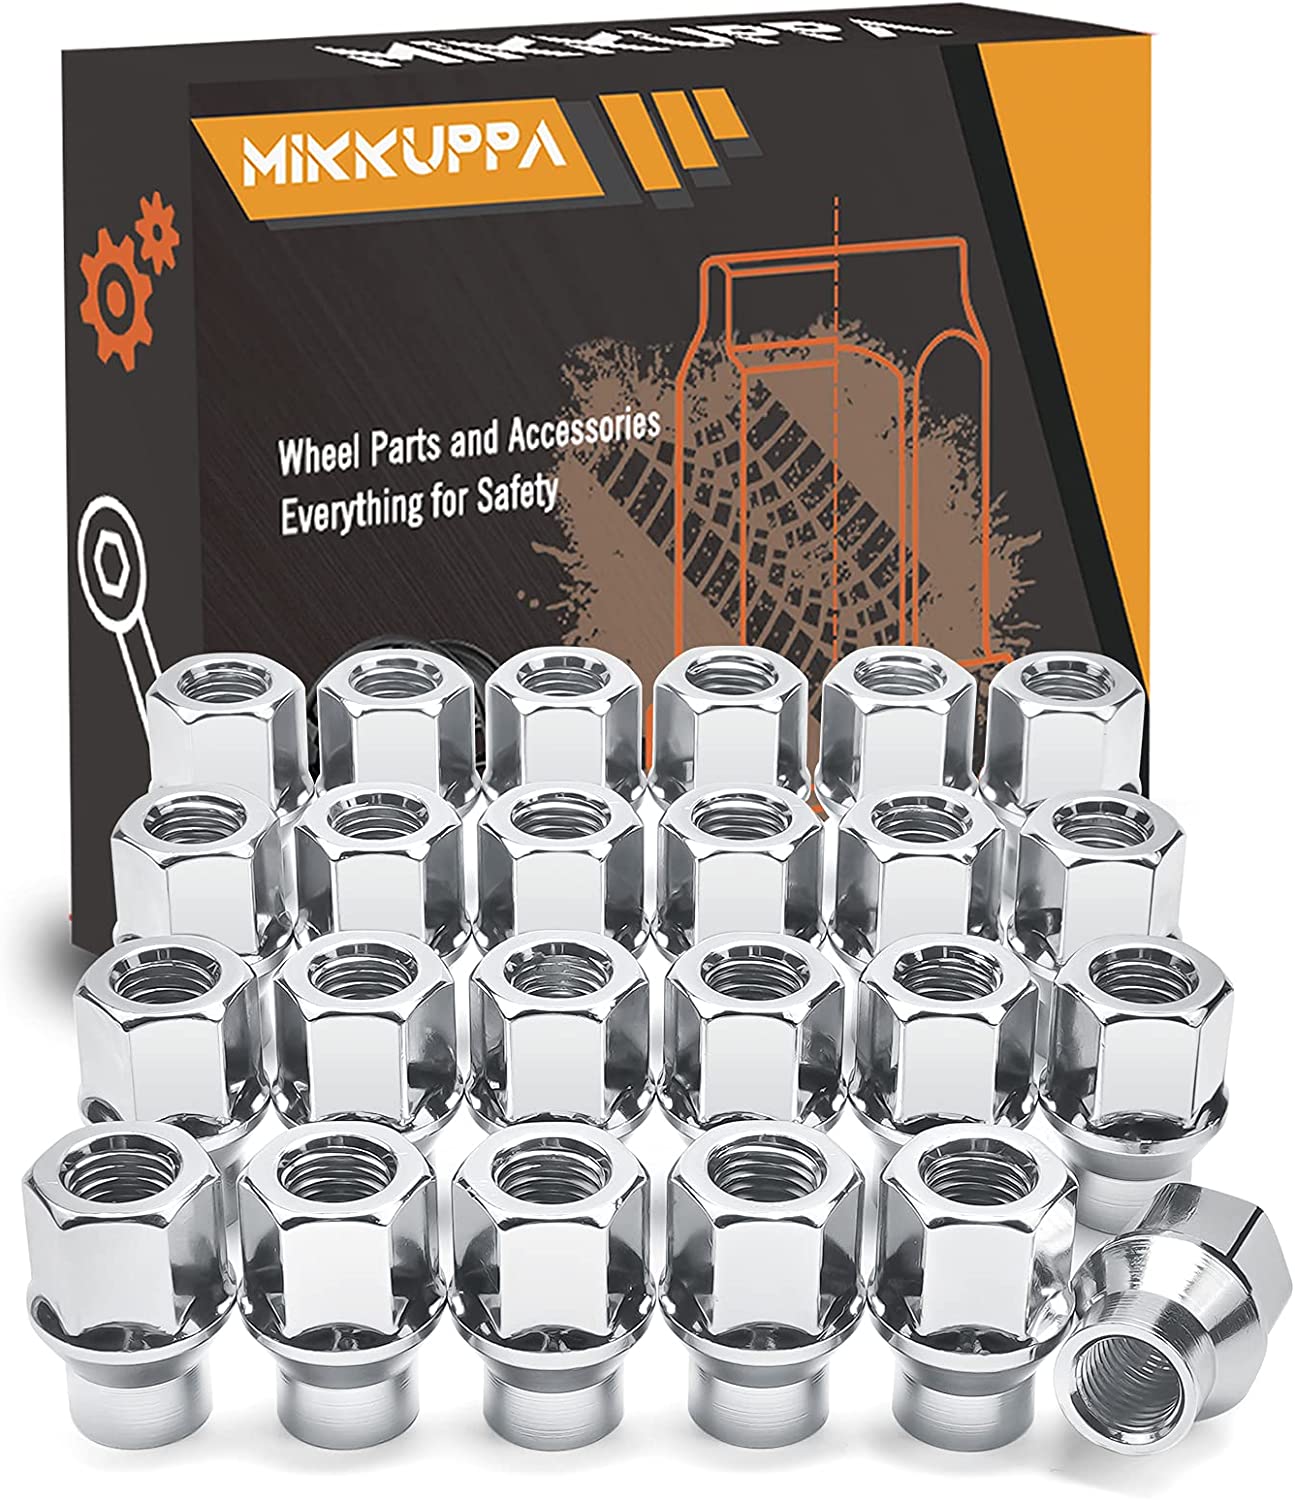 MIKKUPPA 12x1.5 Extended Open Lug Nuts - 24PCS M12x1.5 ET Lug Nuts with 7mm Shank, Replacement for Tacoma Tundra Sequoia 4Runner